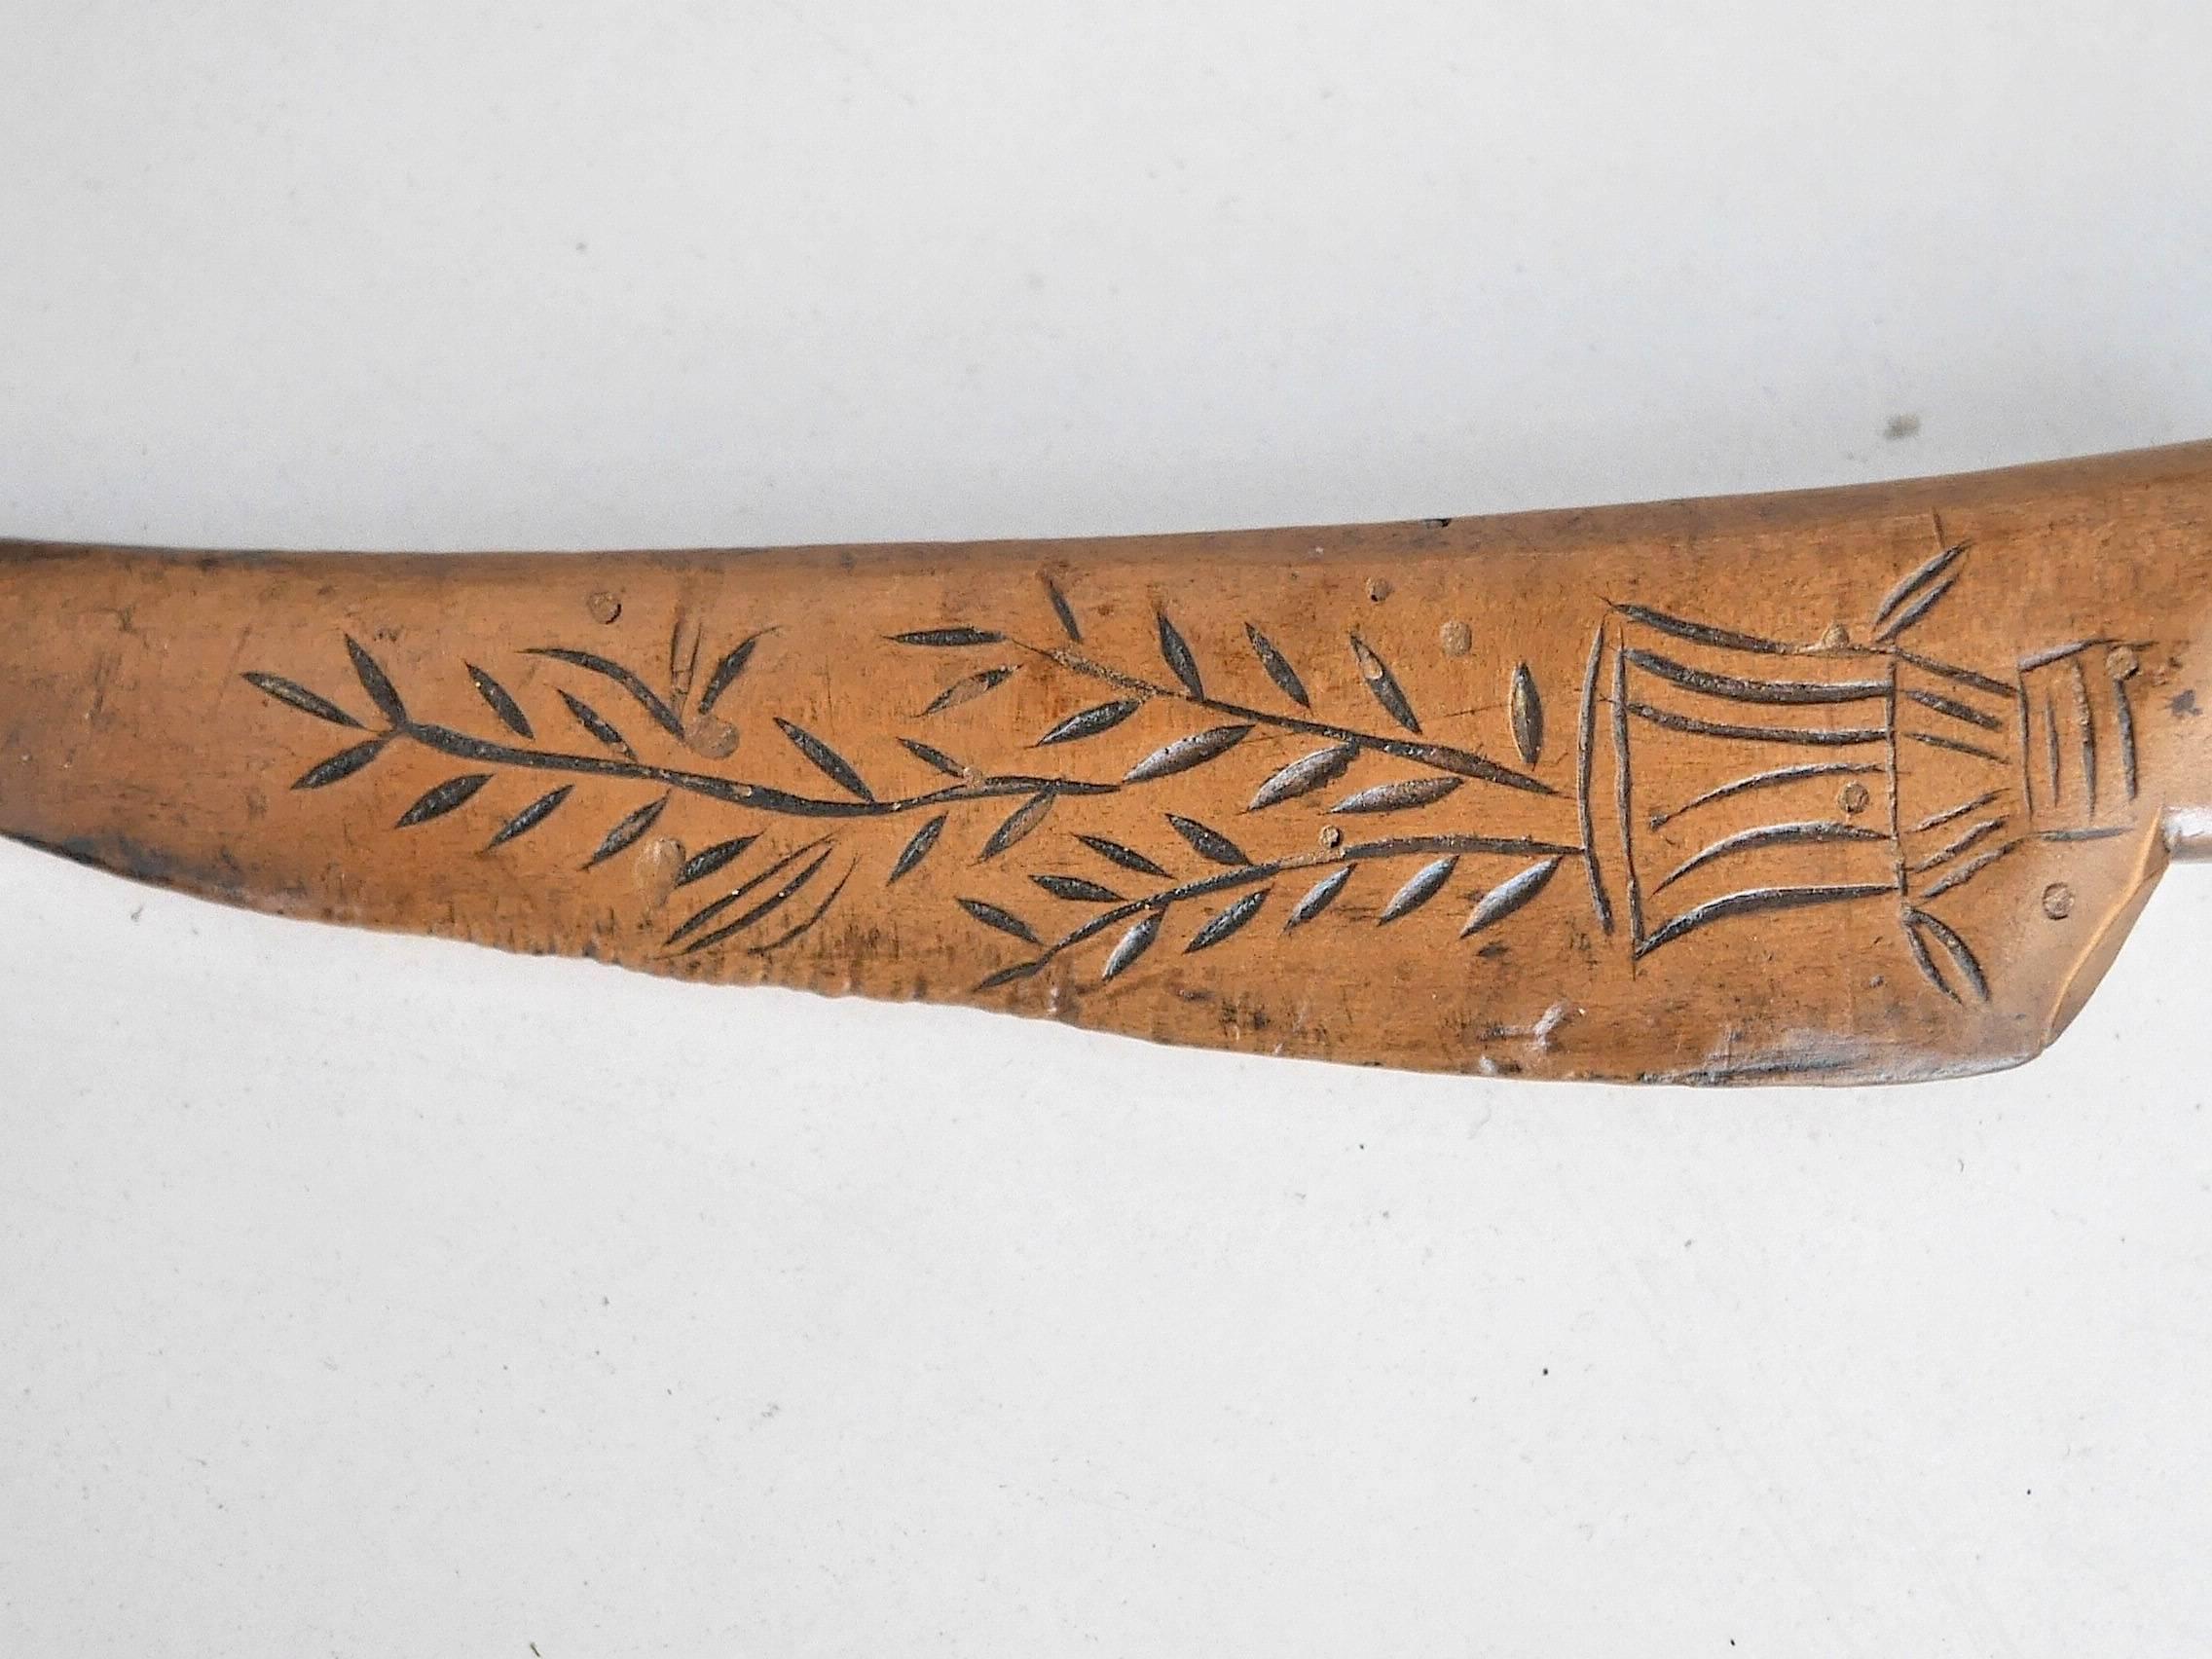 Boxwood knife engraved with botanical details on both sides of the blade,
Pyrenees, France.